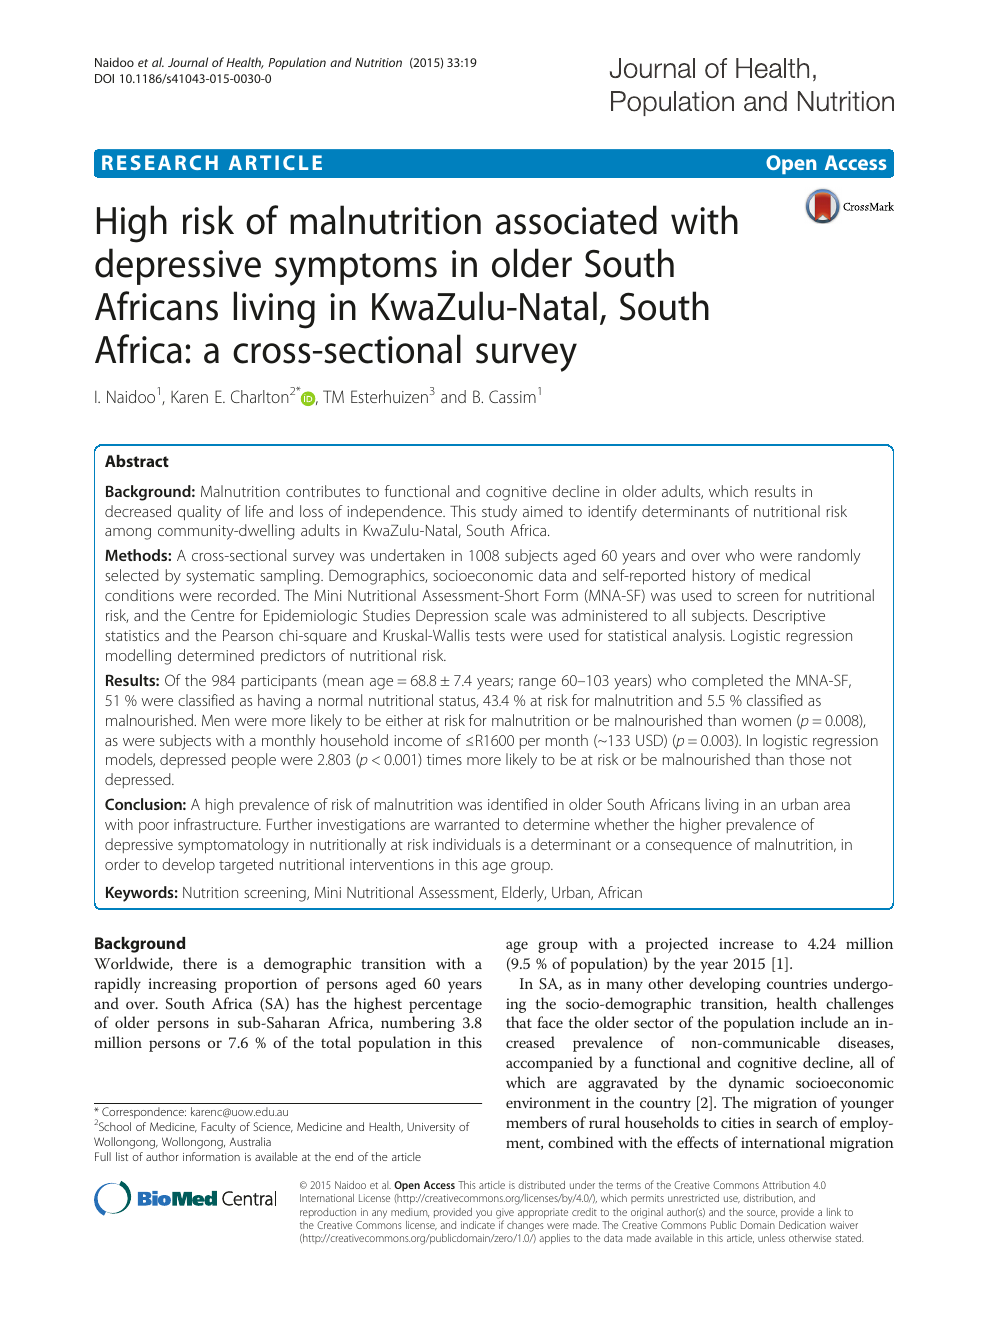 High Risk Of Malnutrition Associated With Depressive Symptoms